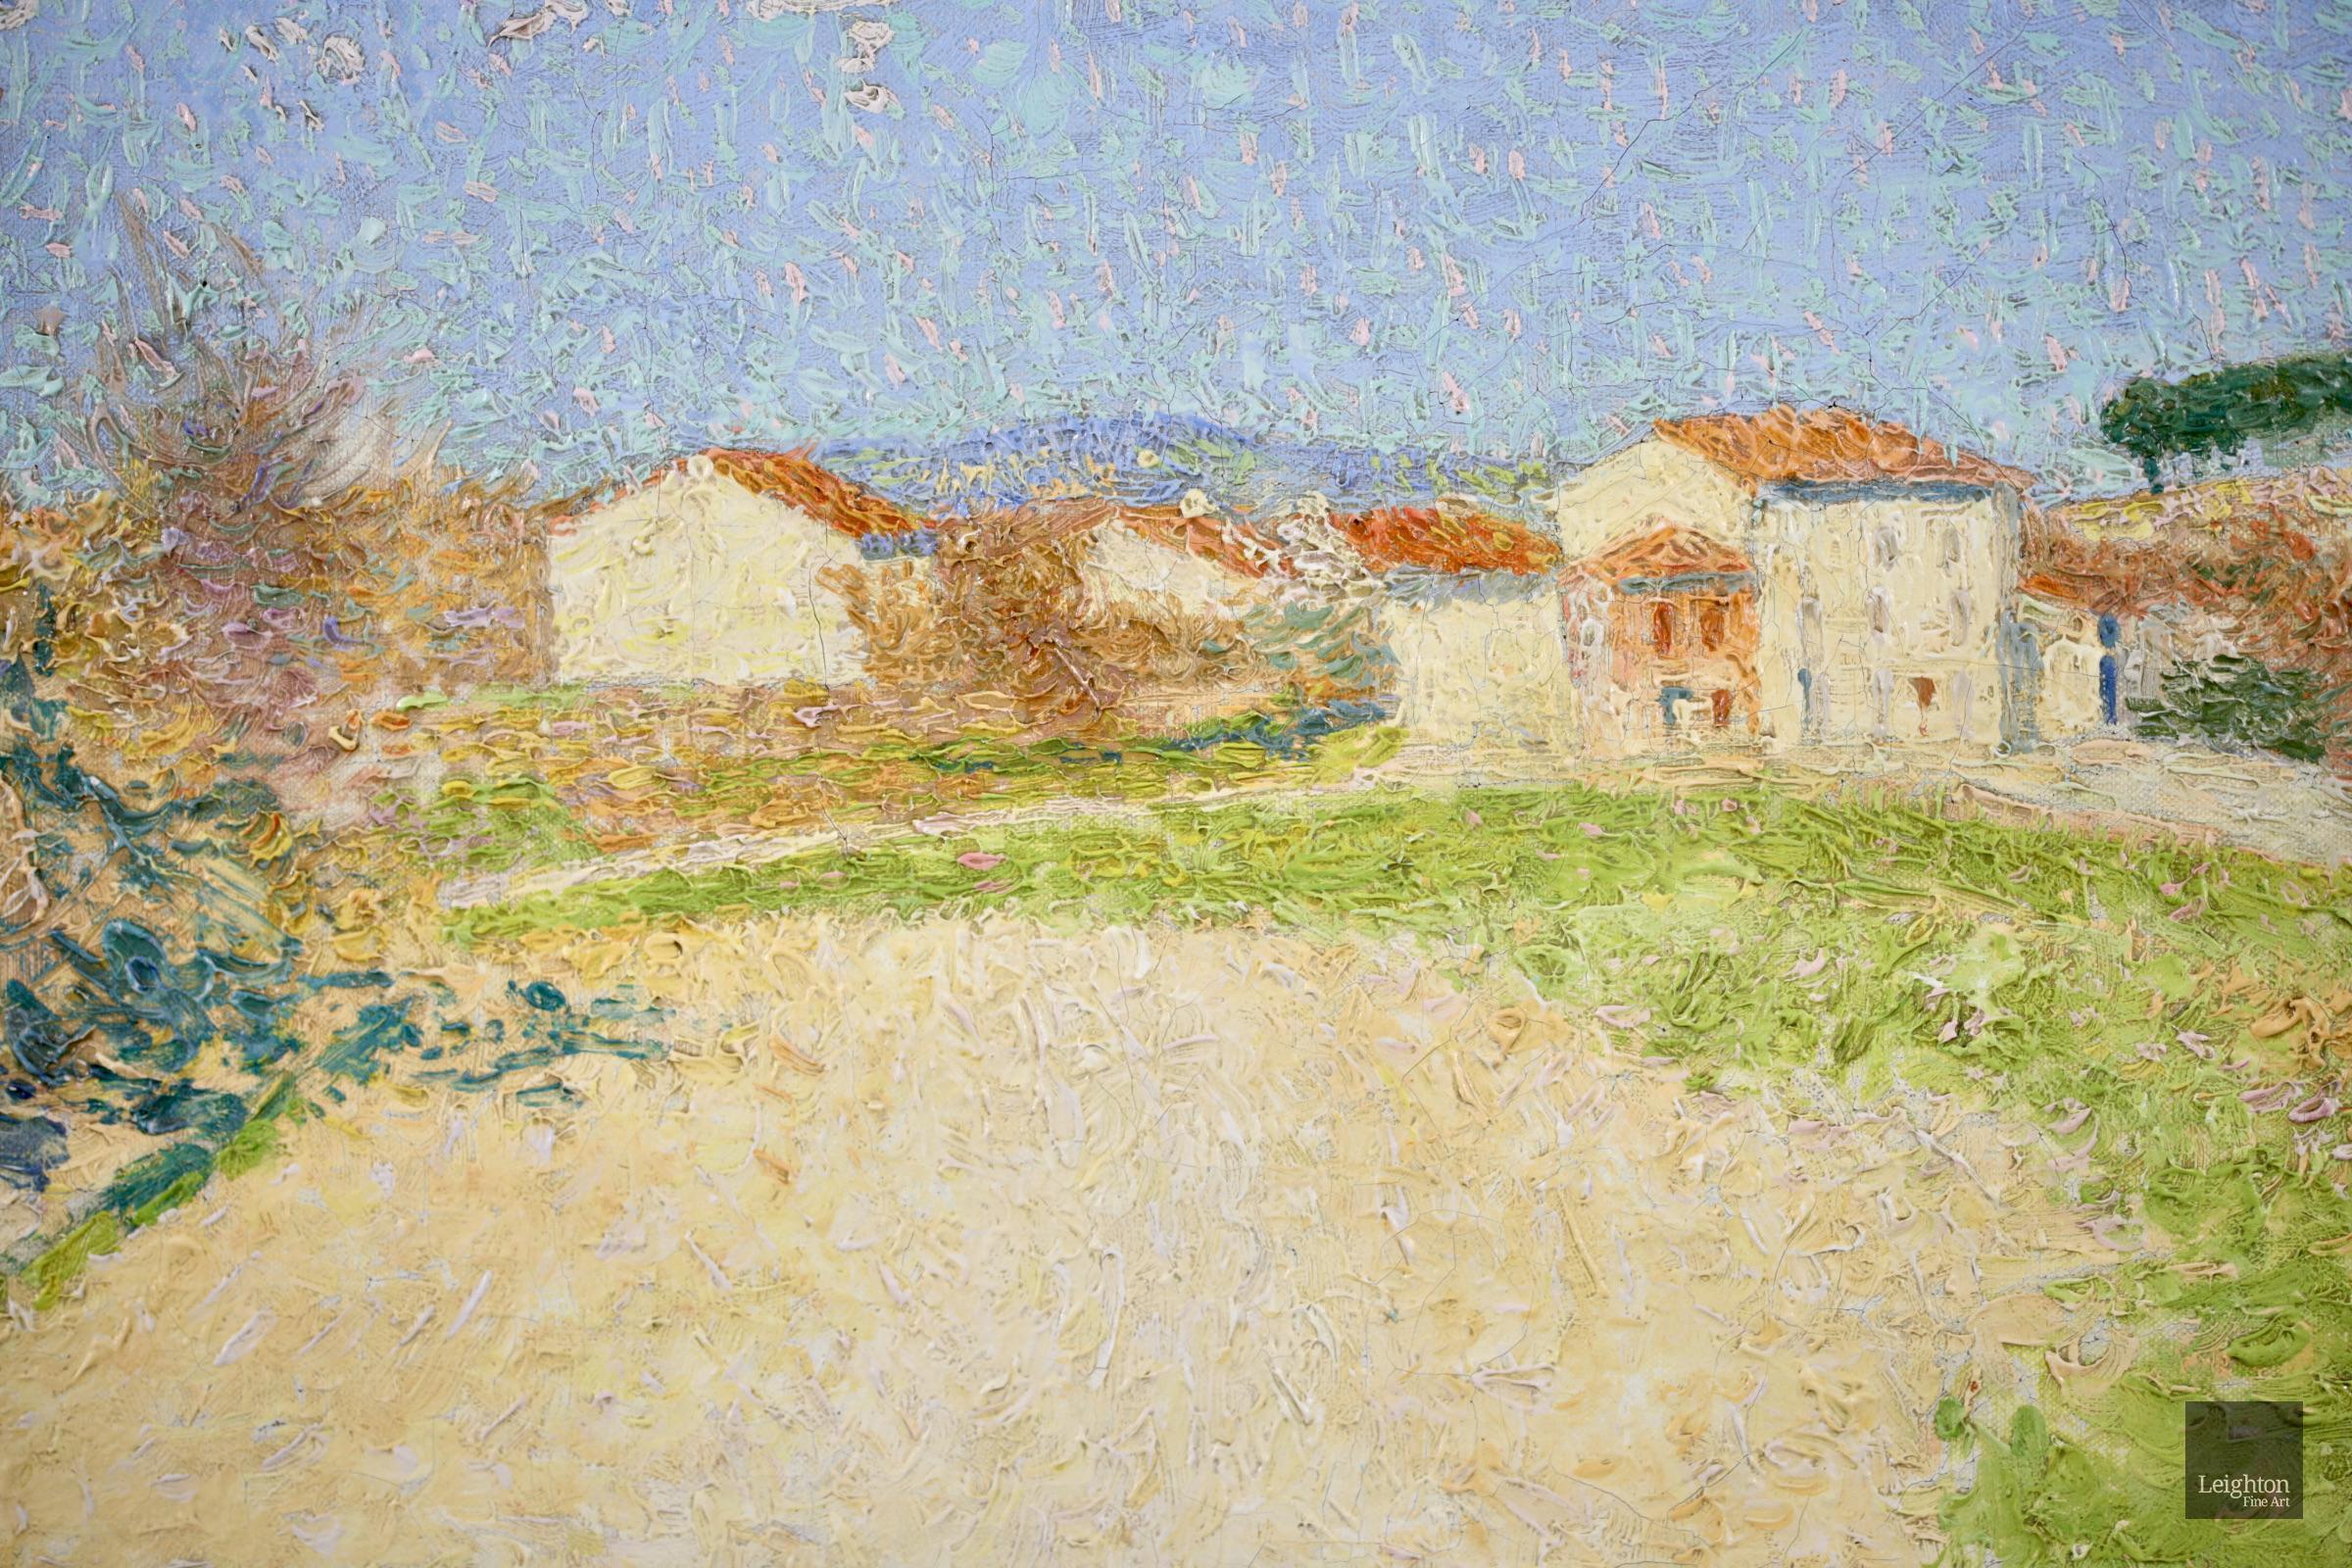 Stunning pointillist landscape oil on panel circa 1920 by French neo-impressionist painter Achille Lauge. The work depicts a path leading to the small village of Belveze du Razes in the South of France on a bright spring day. To the left are white